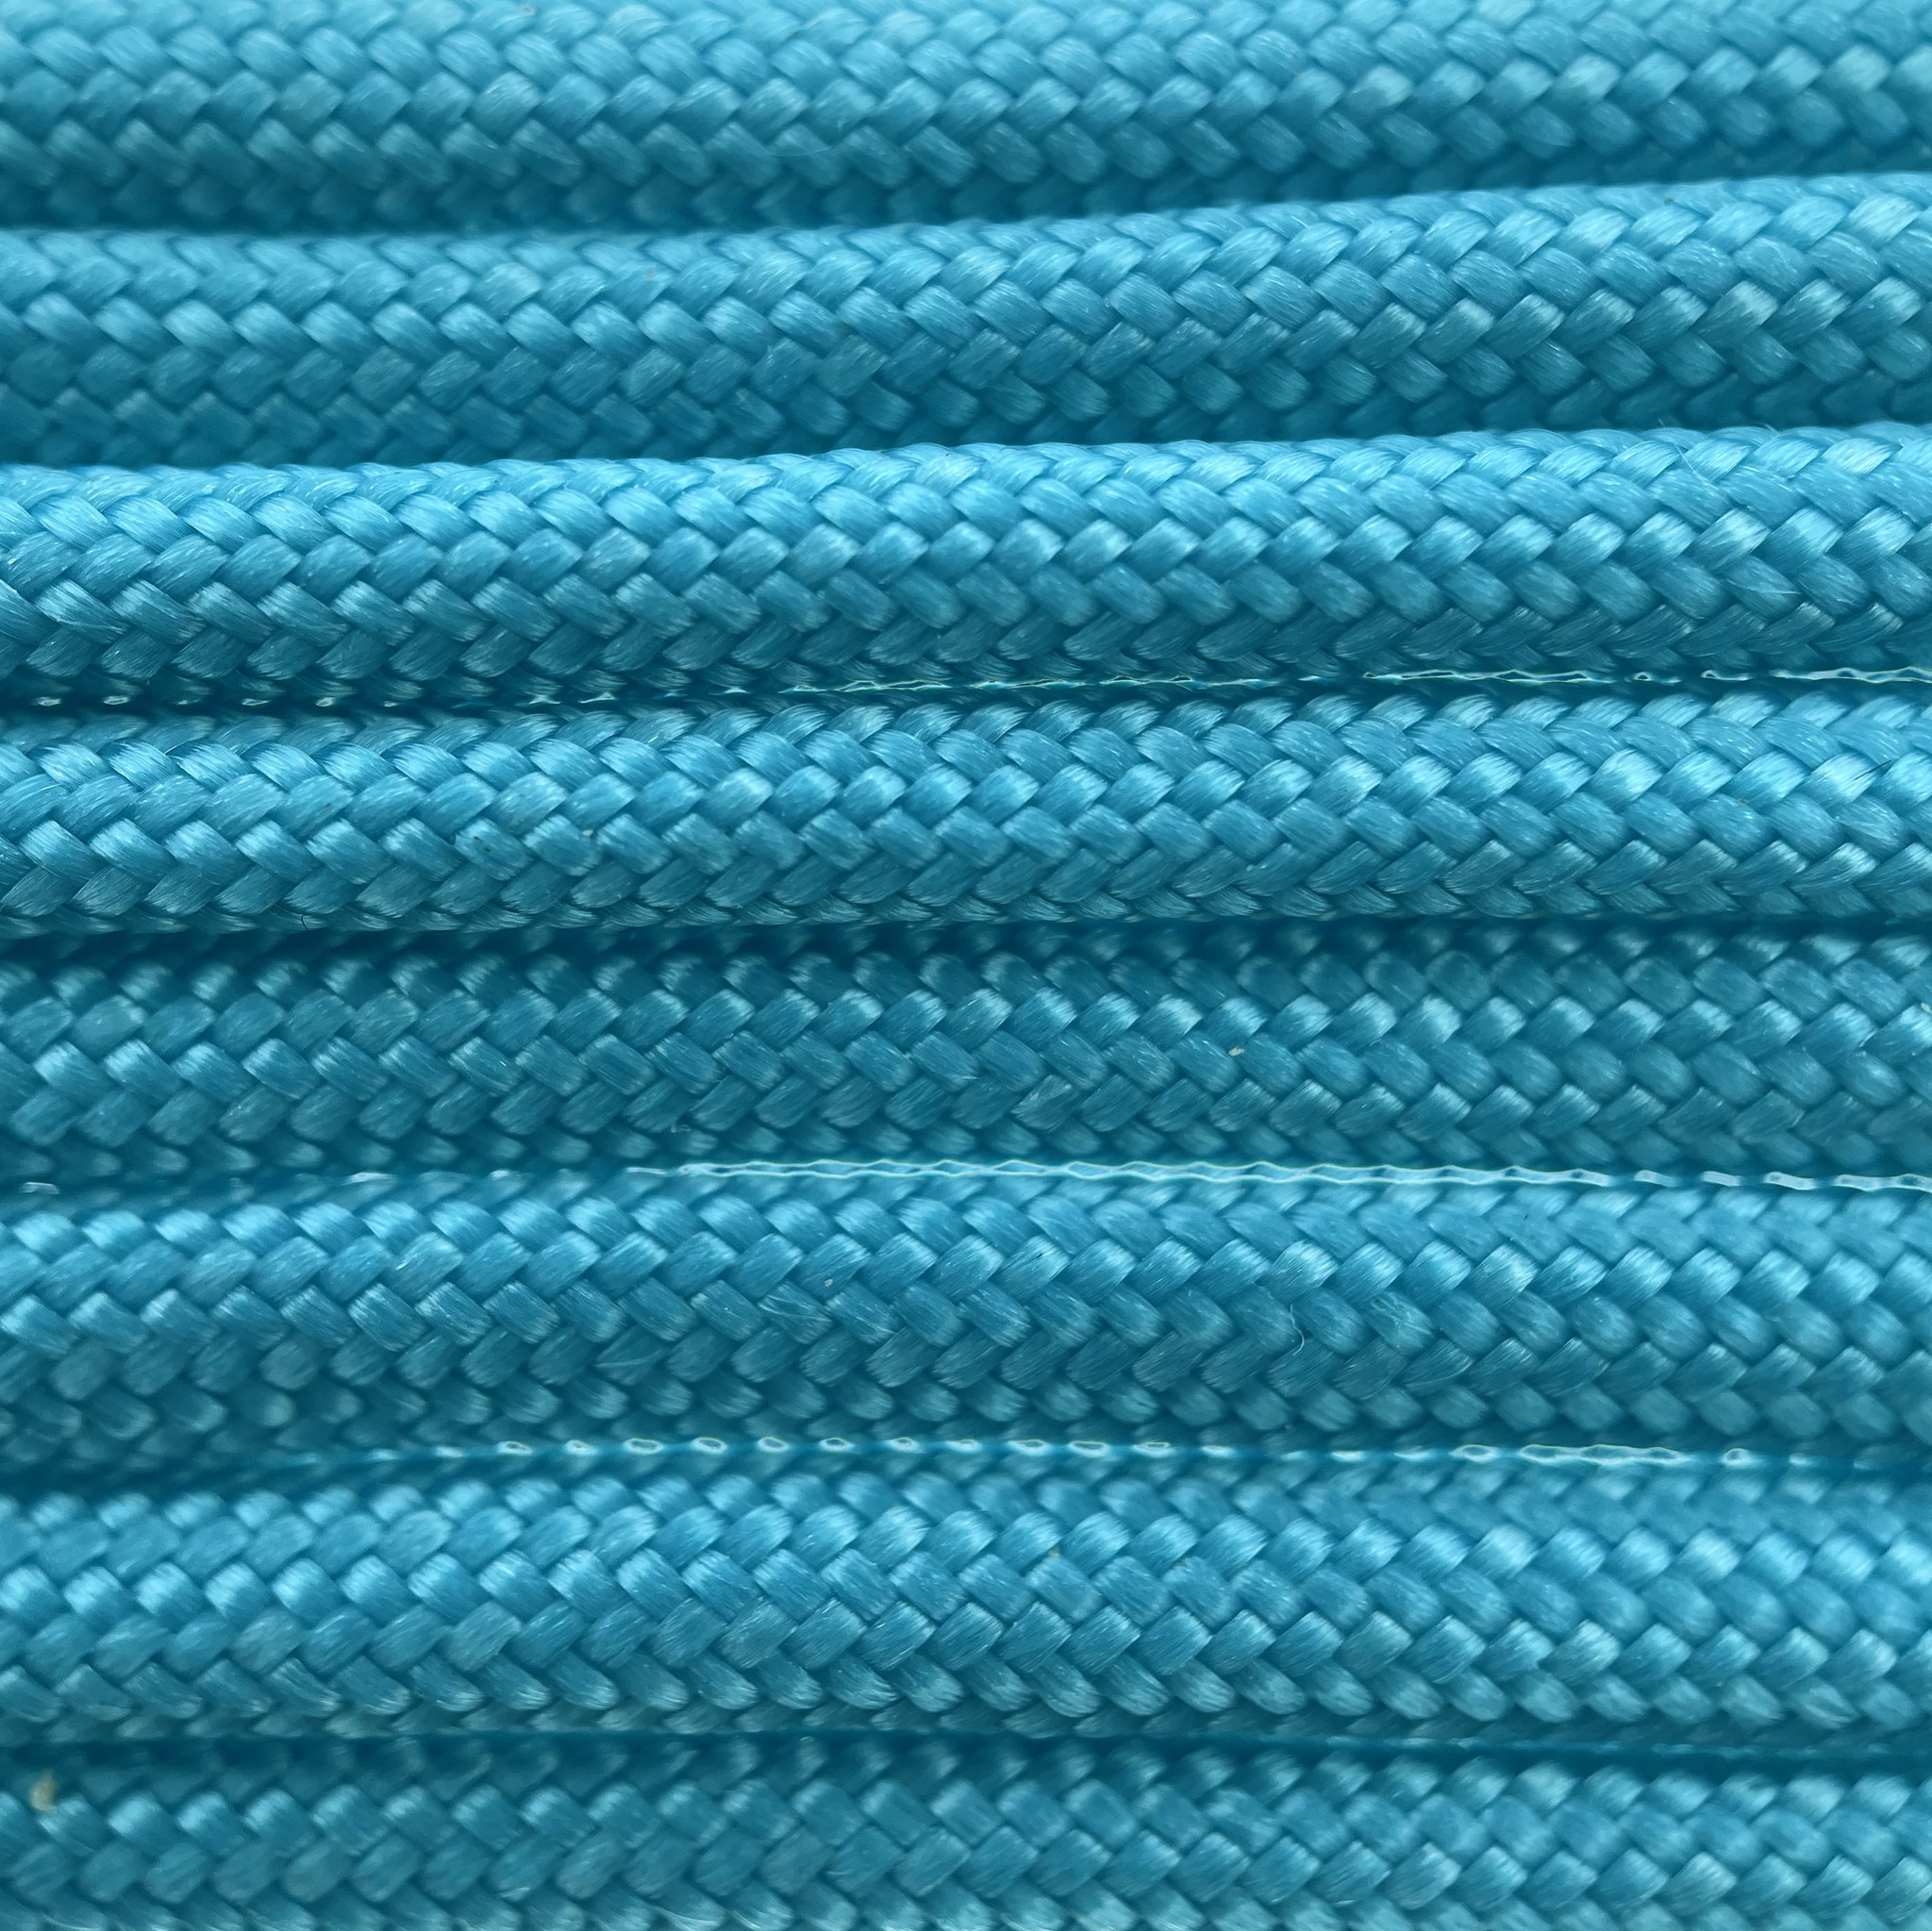 Buy Paracord 550 type III Neon Turquoise from the expert - 123Paracord